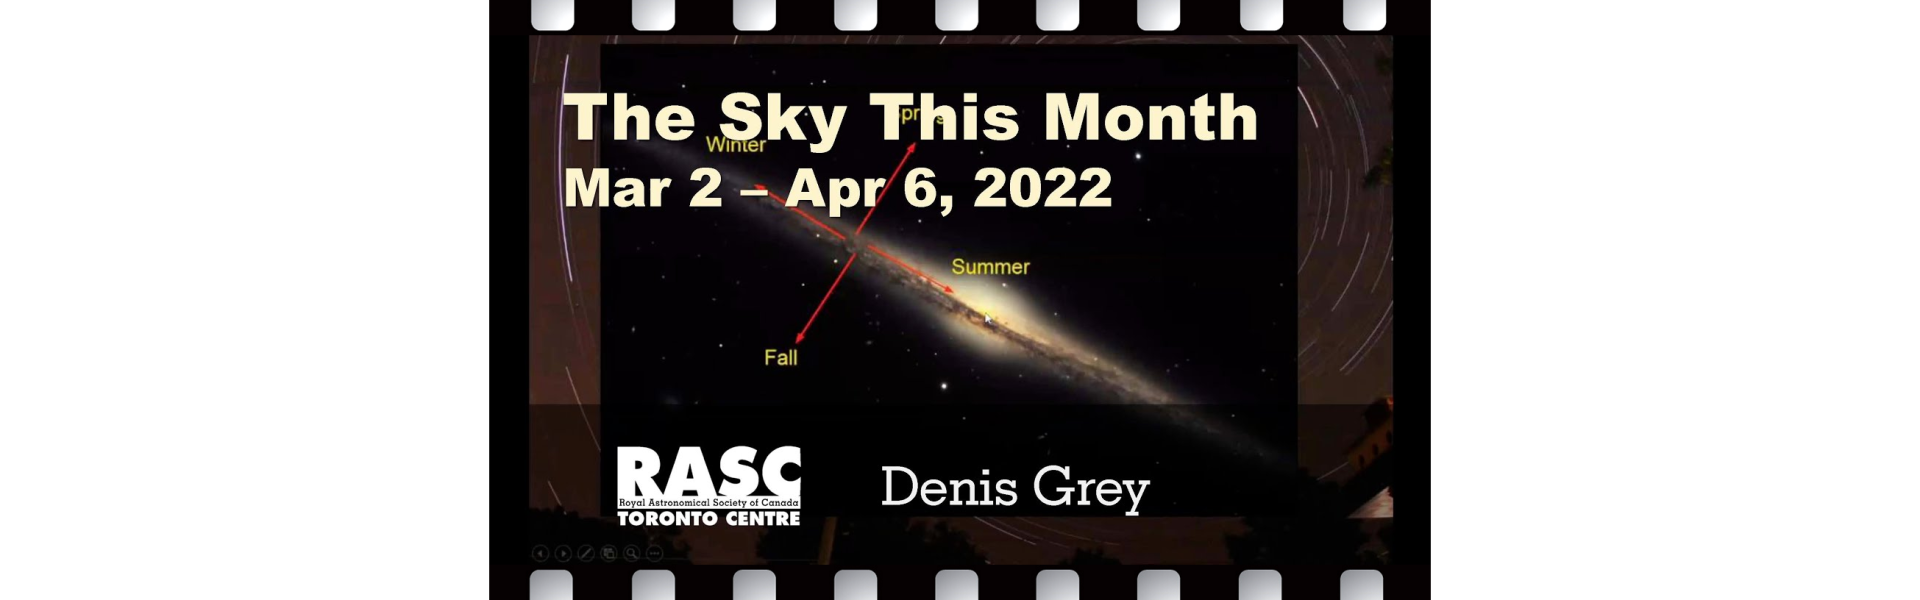 The Sky This Month, Mar 2 - Apr 6, 2022